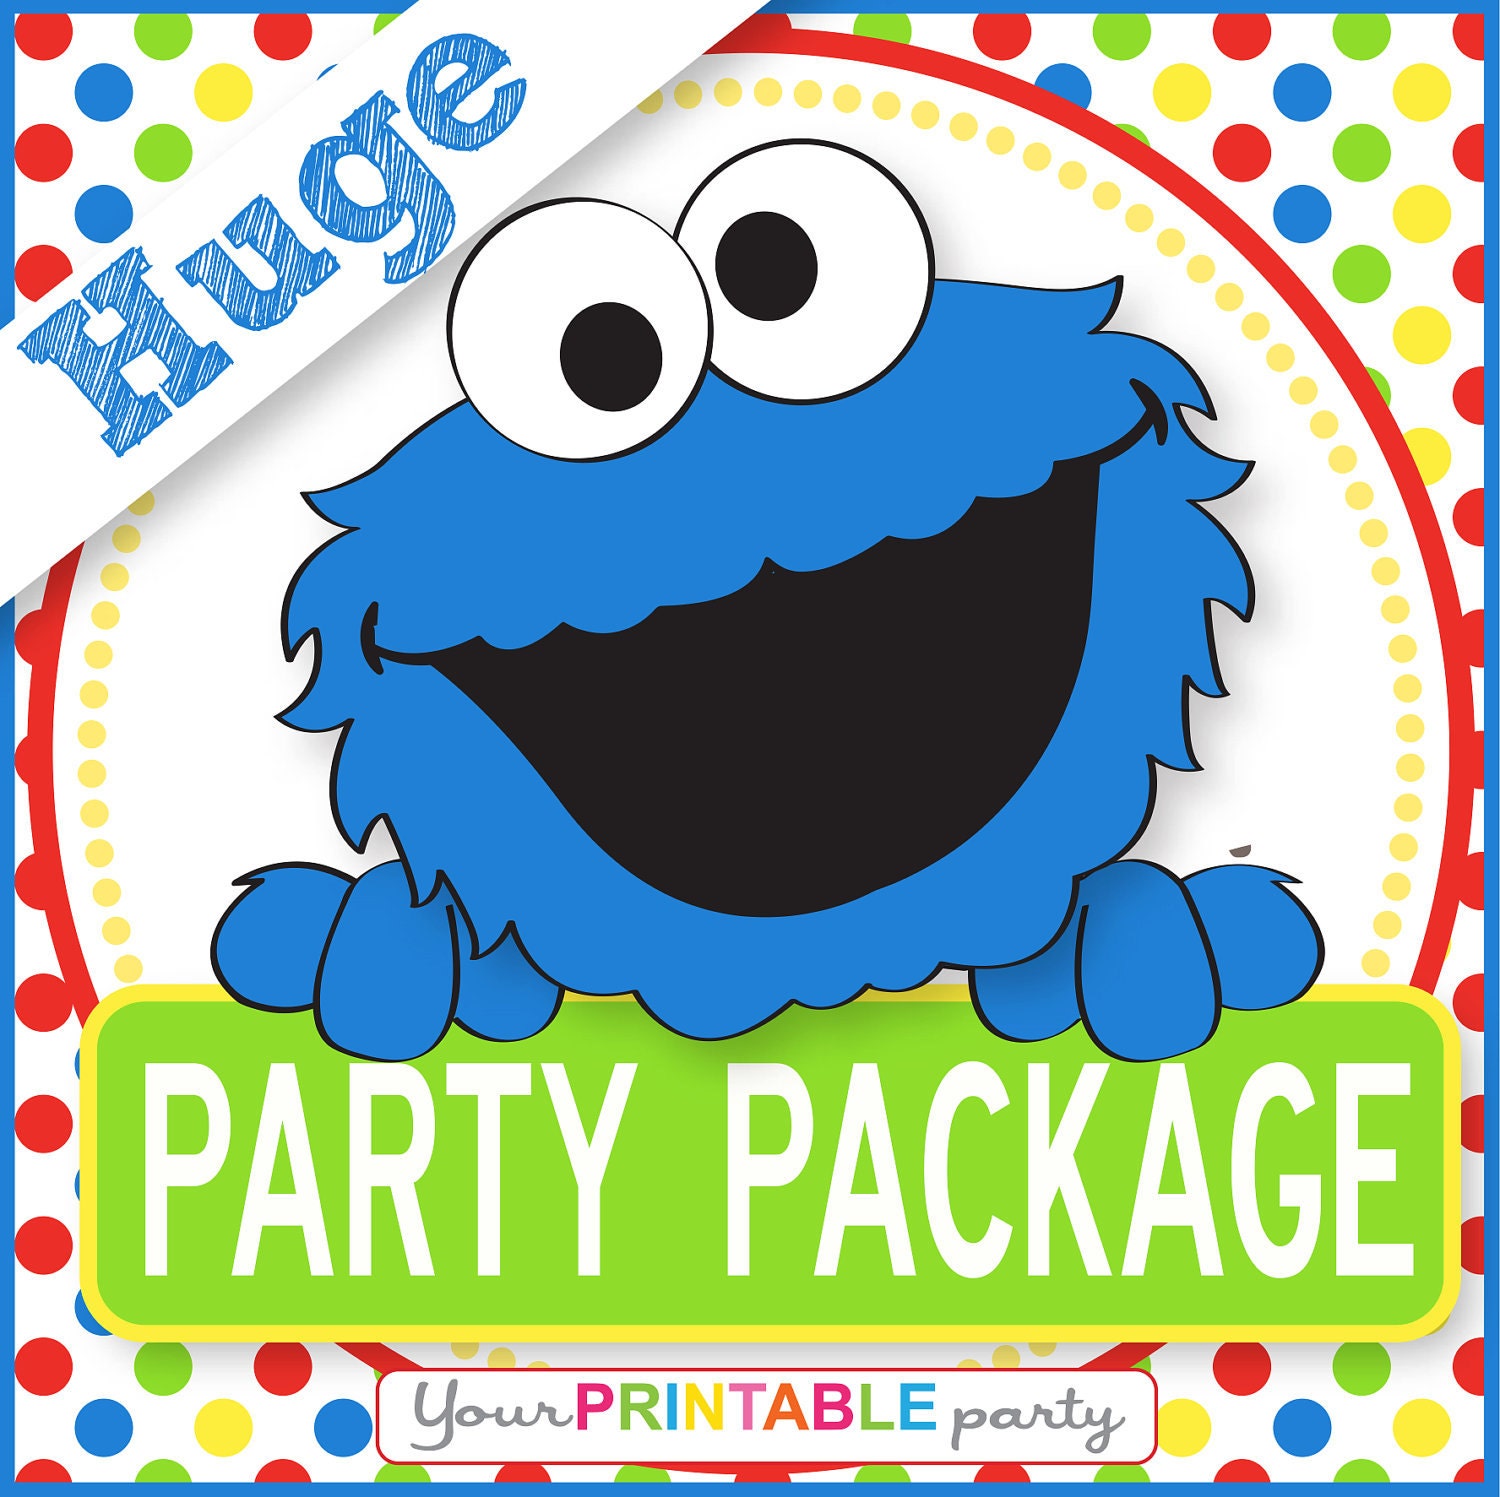 cookie-monster-party-package-personalized-print-yourself